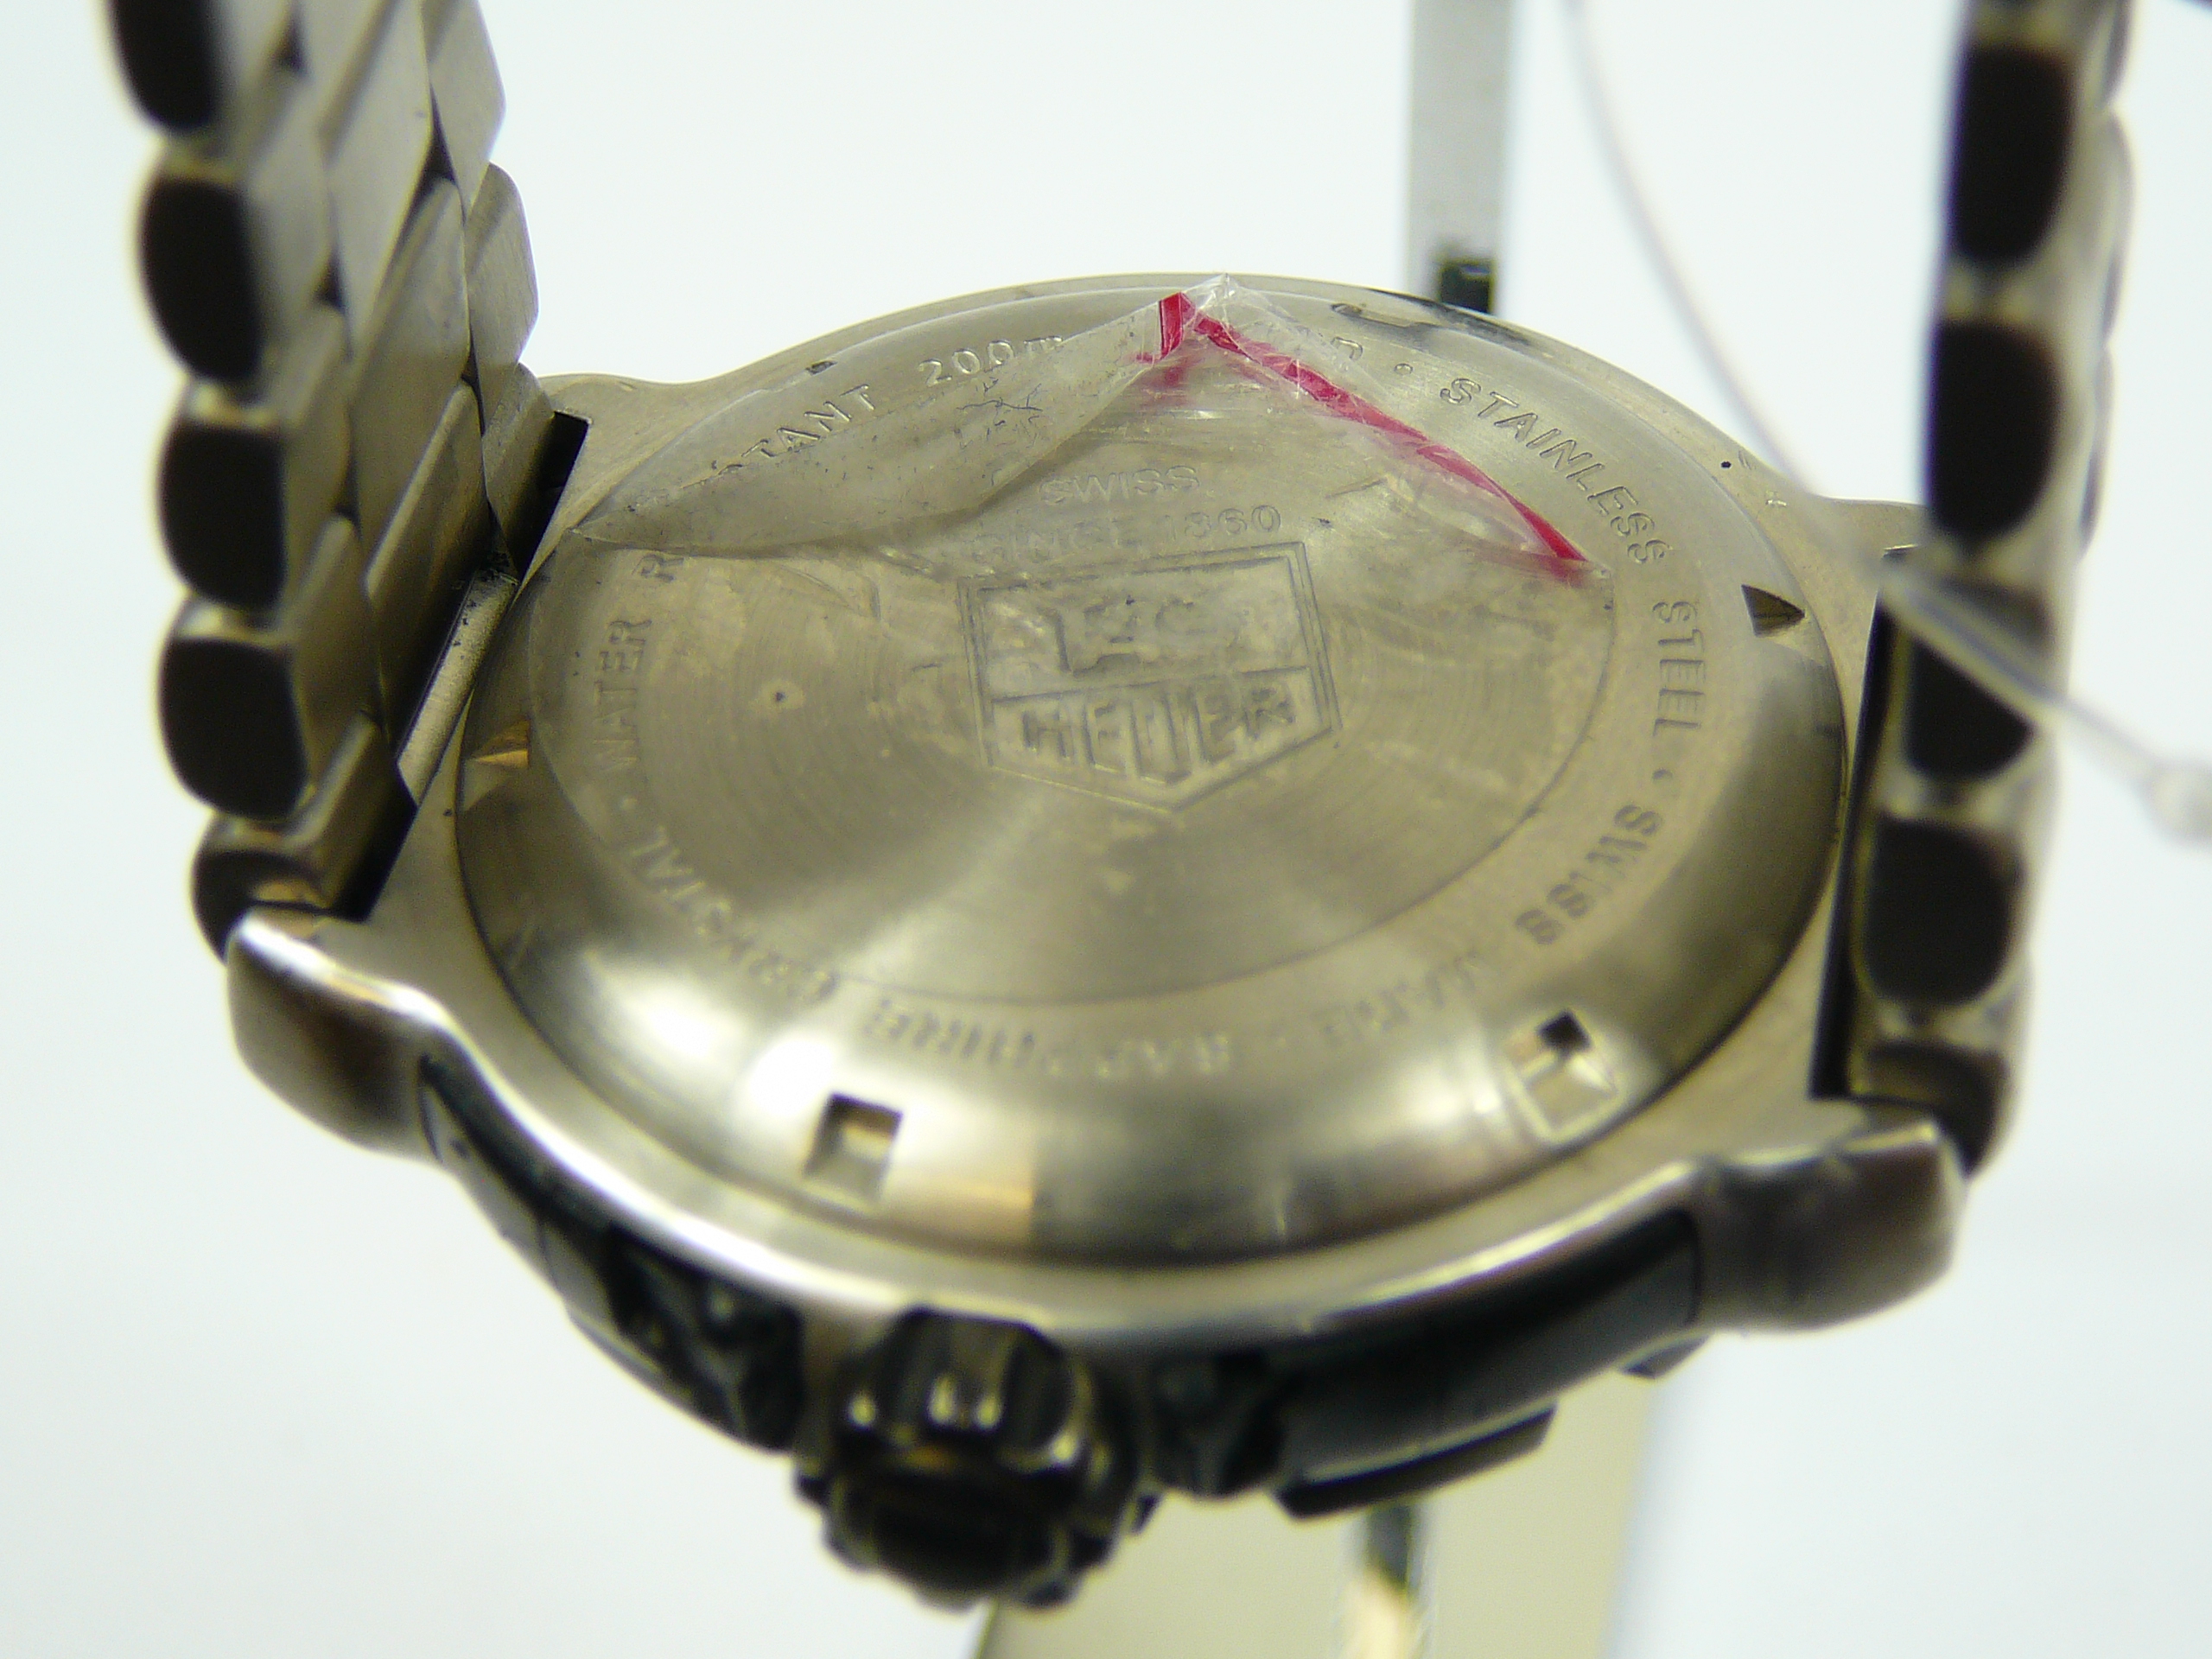 Gents Tag Heuer wrist watch - Image 5 of 5